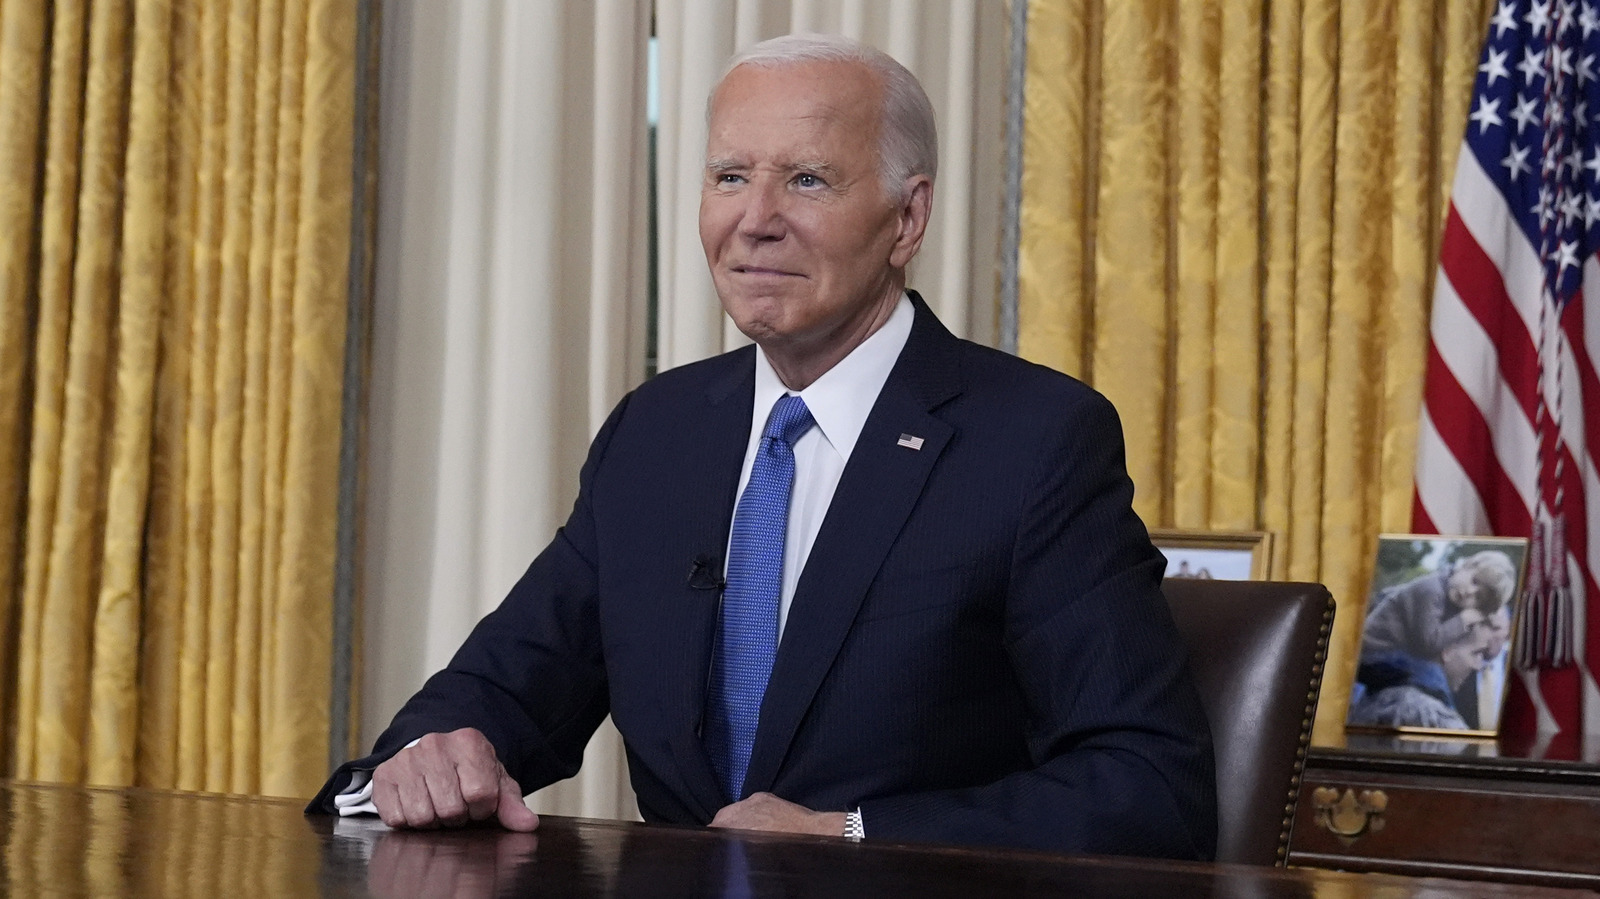 Biden Phones It In For Big Address (& You Probably Missed The Smoking Gun)